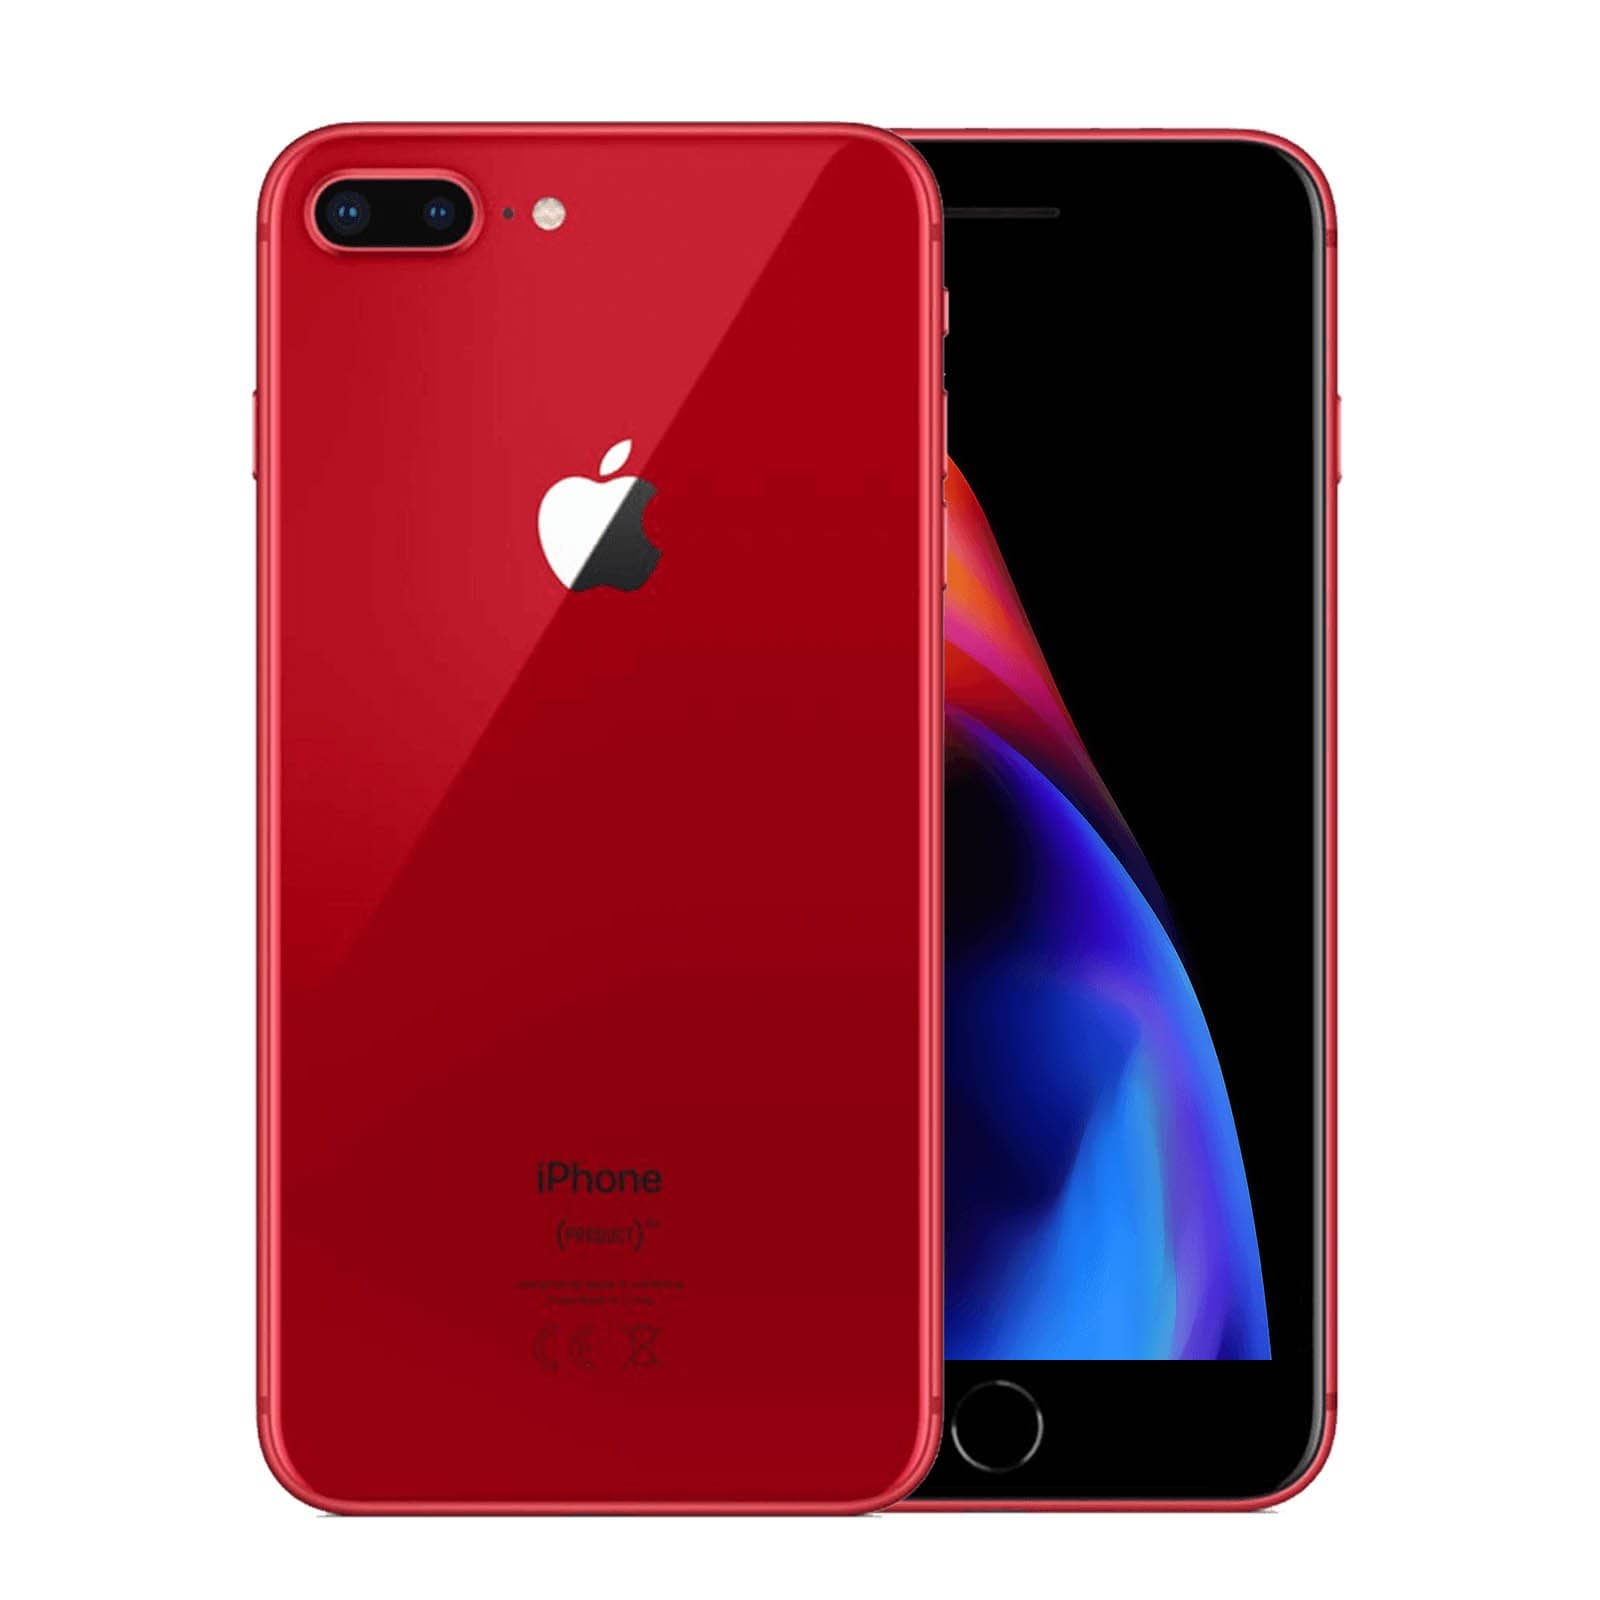 Apple iPhone 8 Plus 256GB Product Red Fair - Unlocked 256GB Product Red Fair